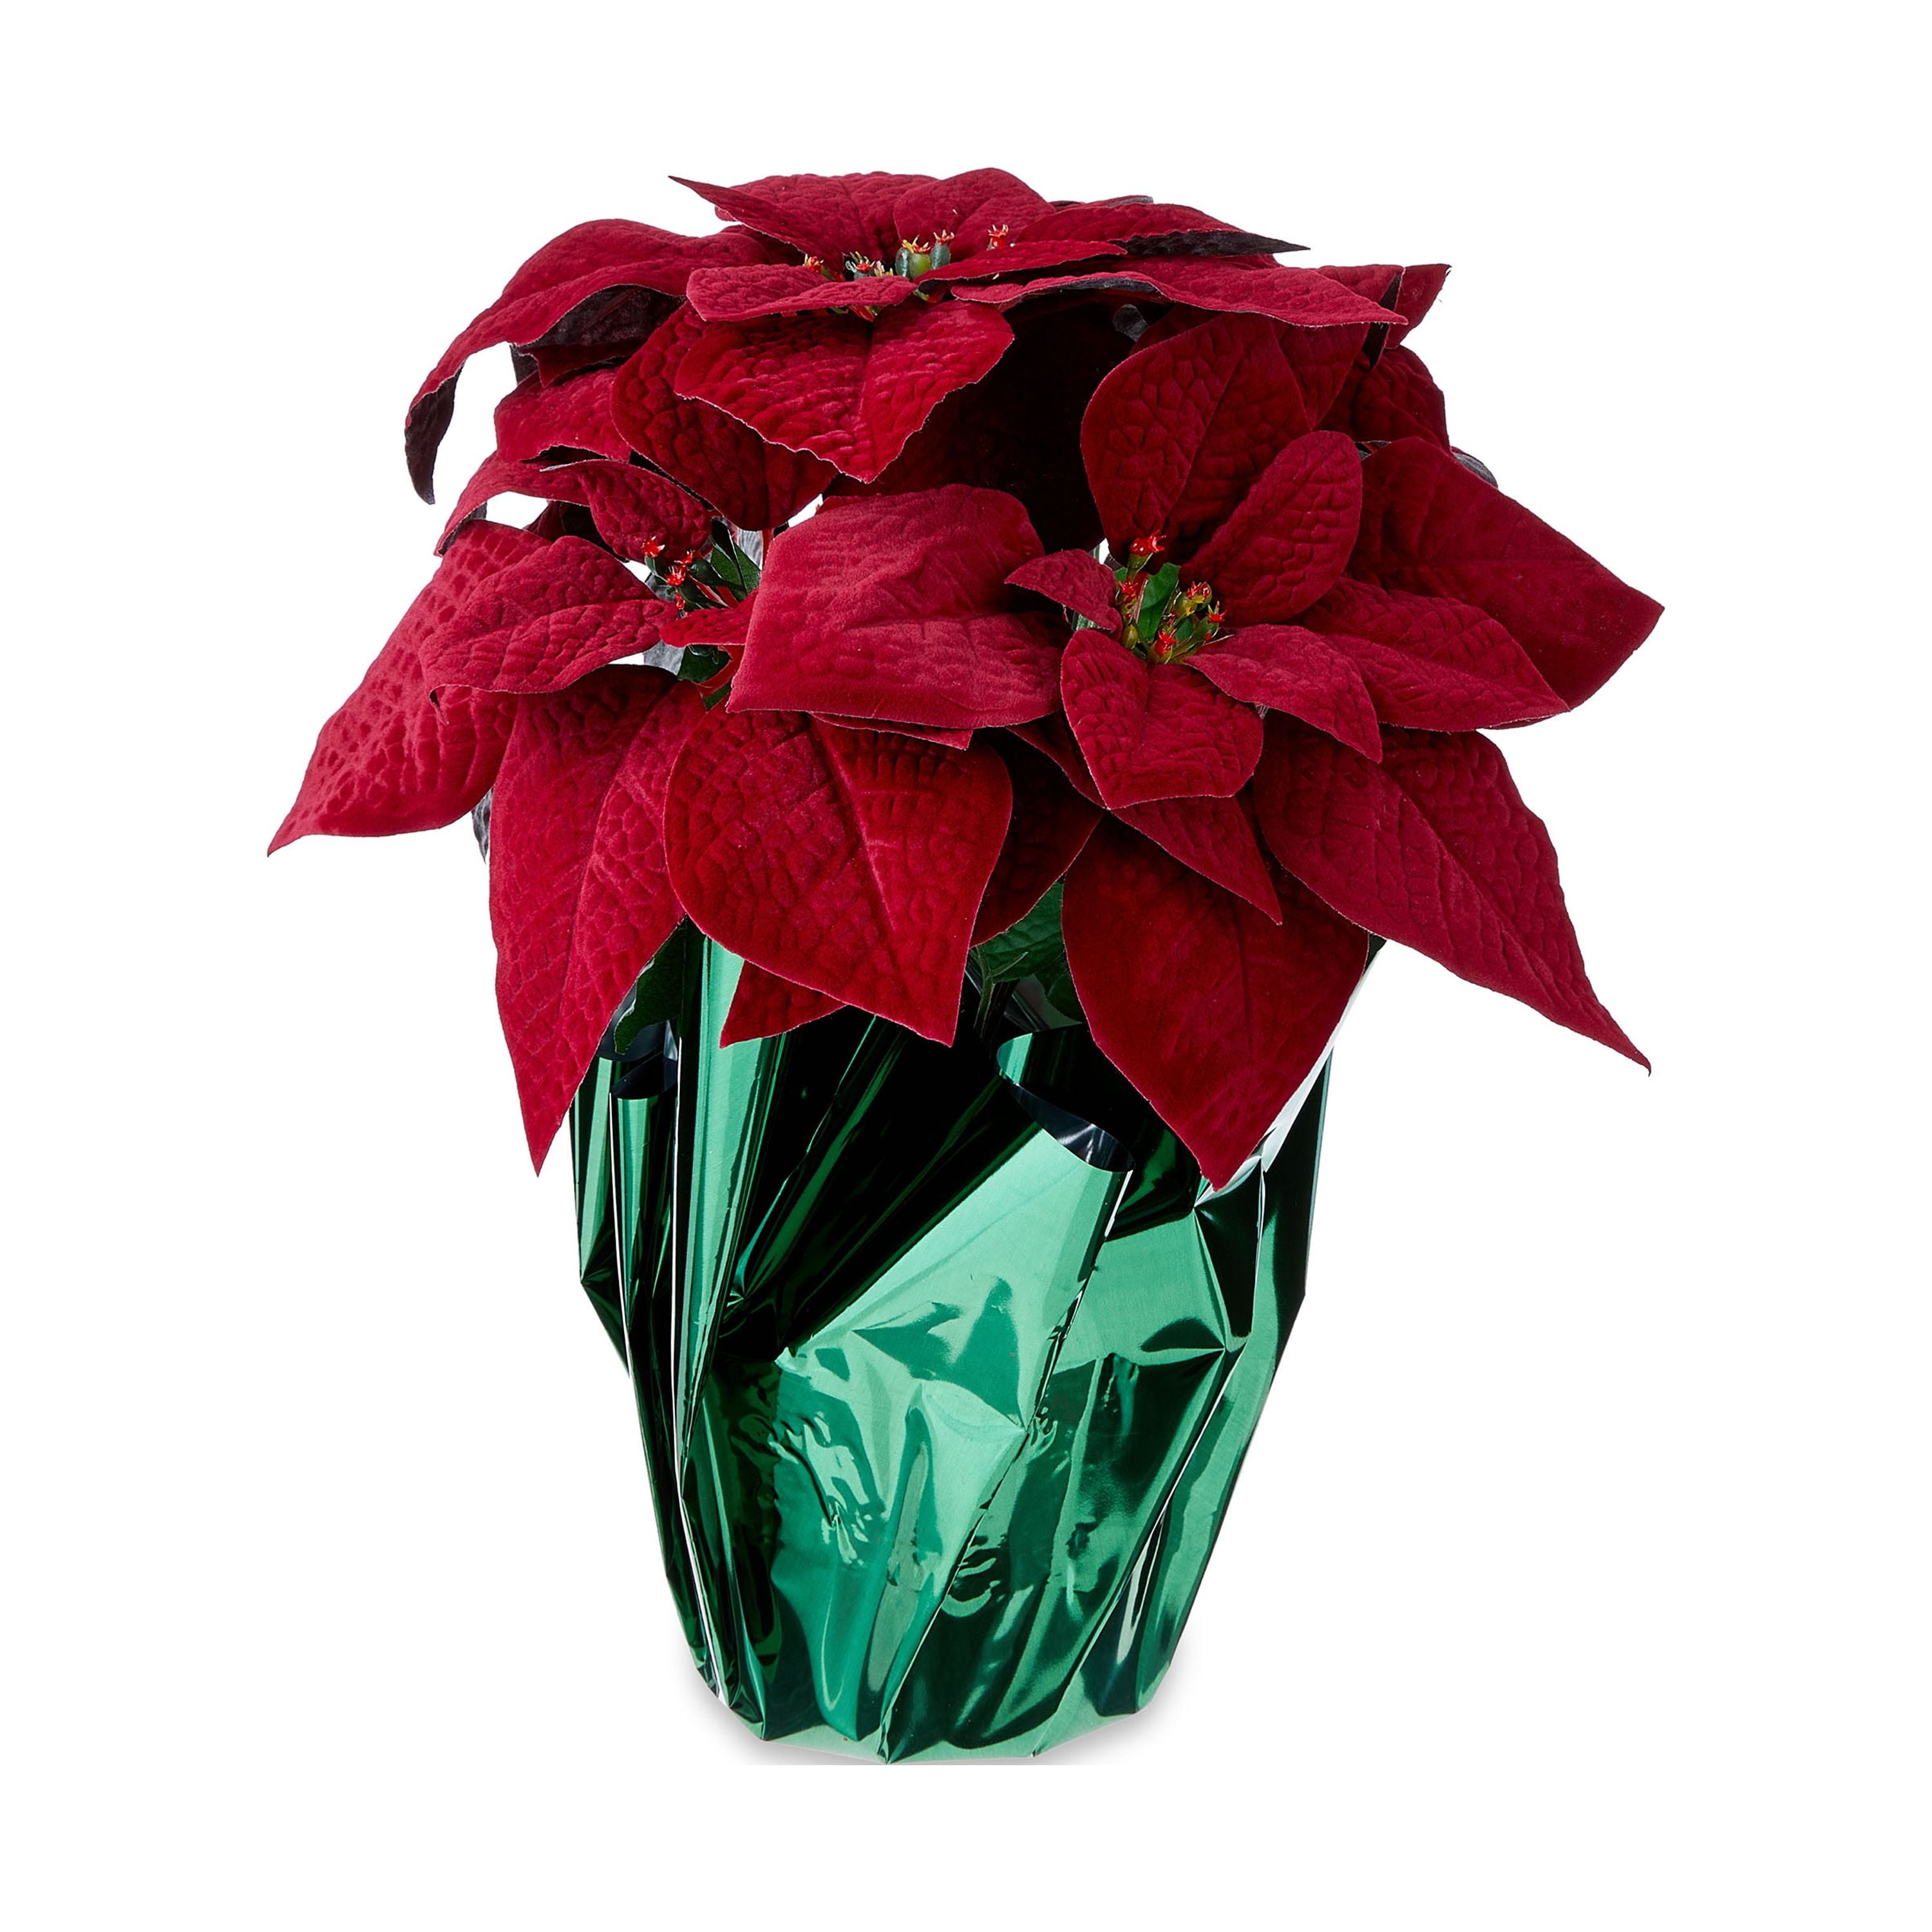  Dolicer 6 Pack Artificial Poinsettia Flowers Red Poinsettias  Bushes 15 Artificial Christmas Flowers with Stems Silk Poinsettia Flowers  Bouquet for Indoor Outdoor Home Porch Garden Decorations : Home & Kitchen